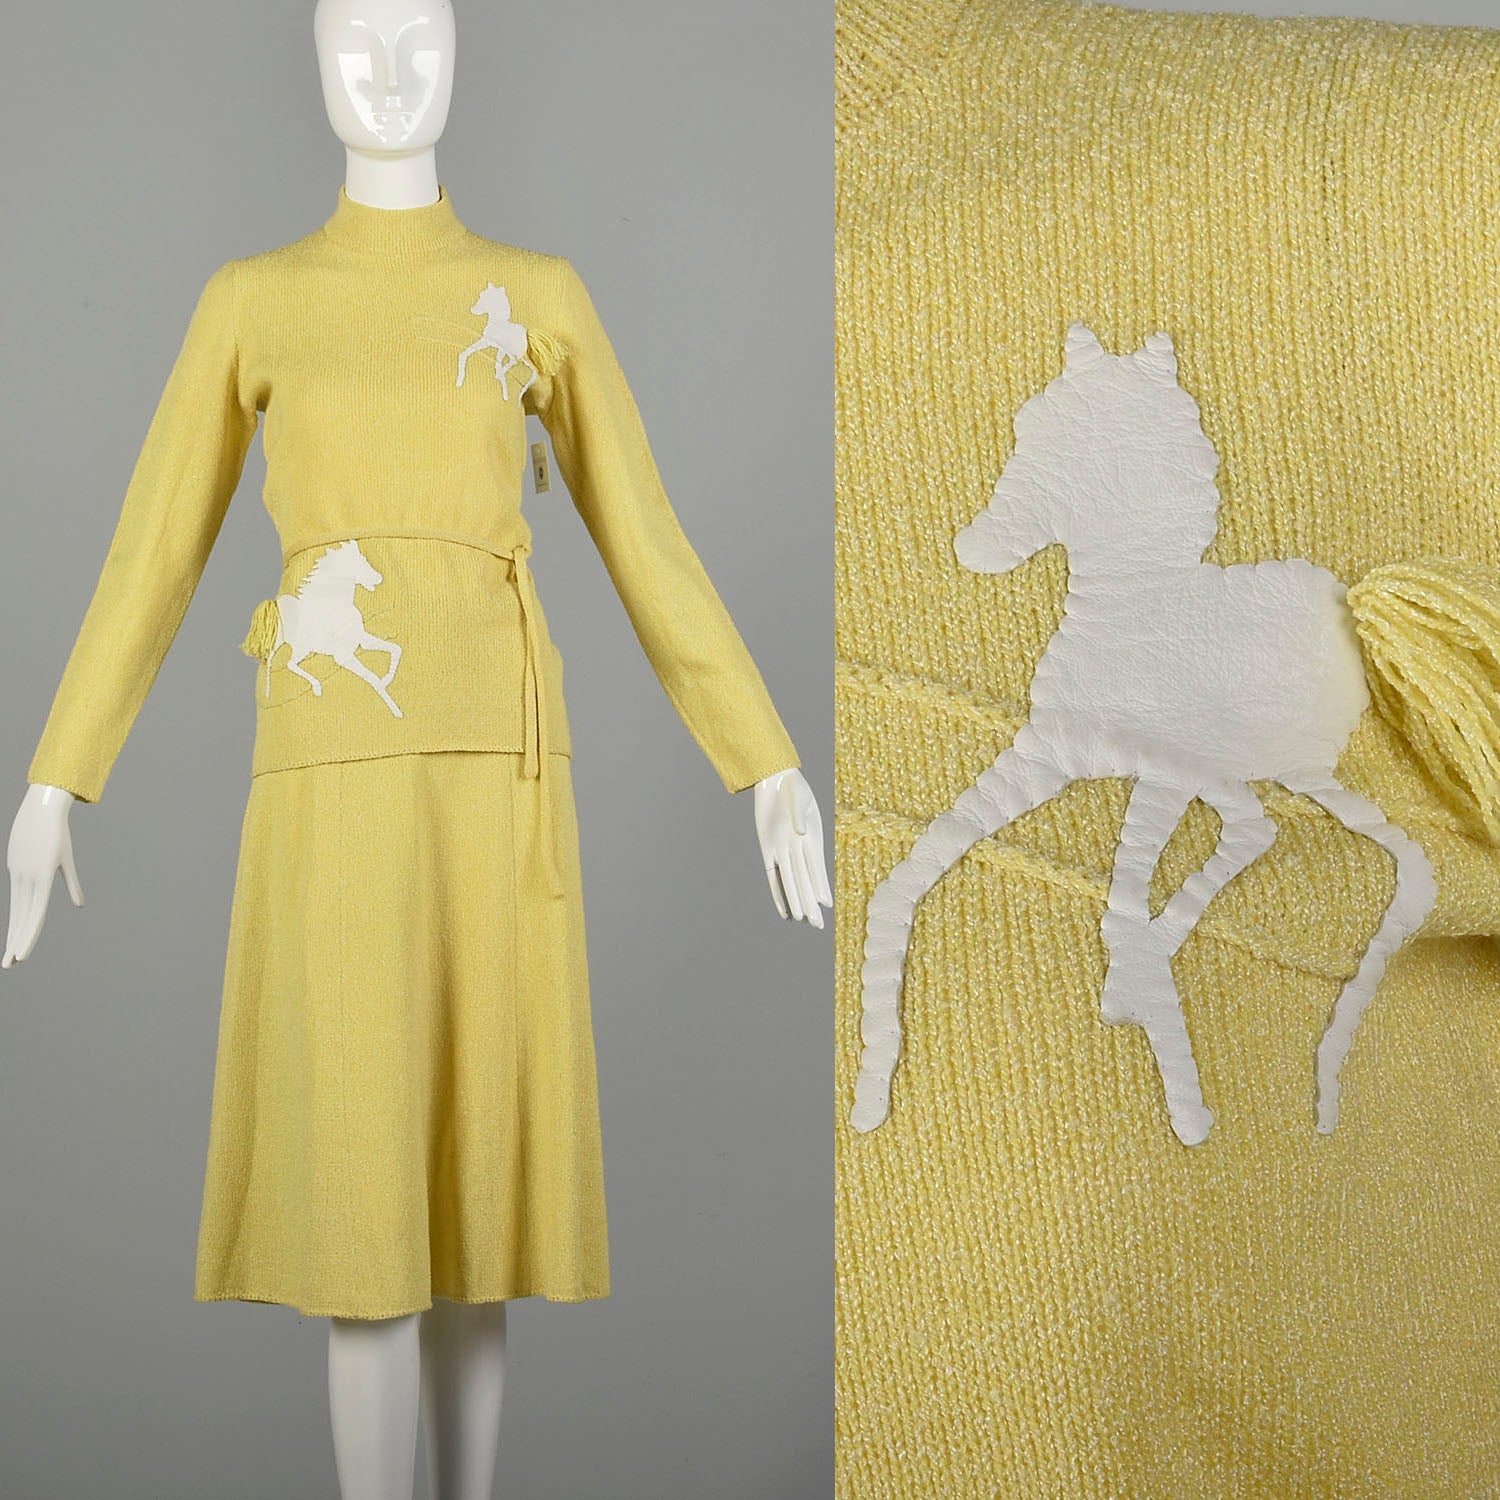 Small 1970s Novelty Horse Knit Outfit Long Sleeve Yellow Top Skirt Separates